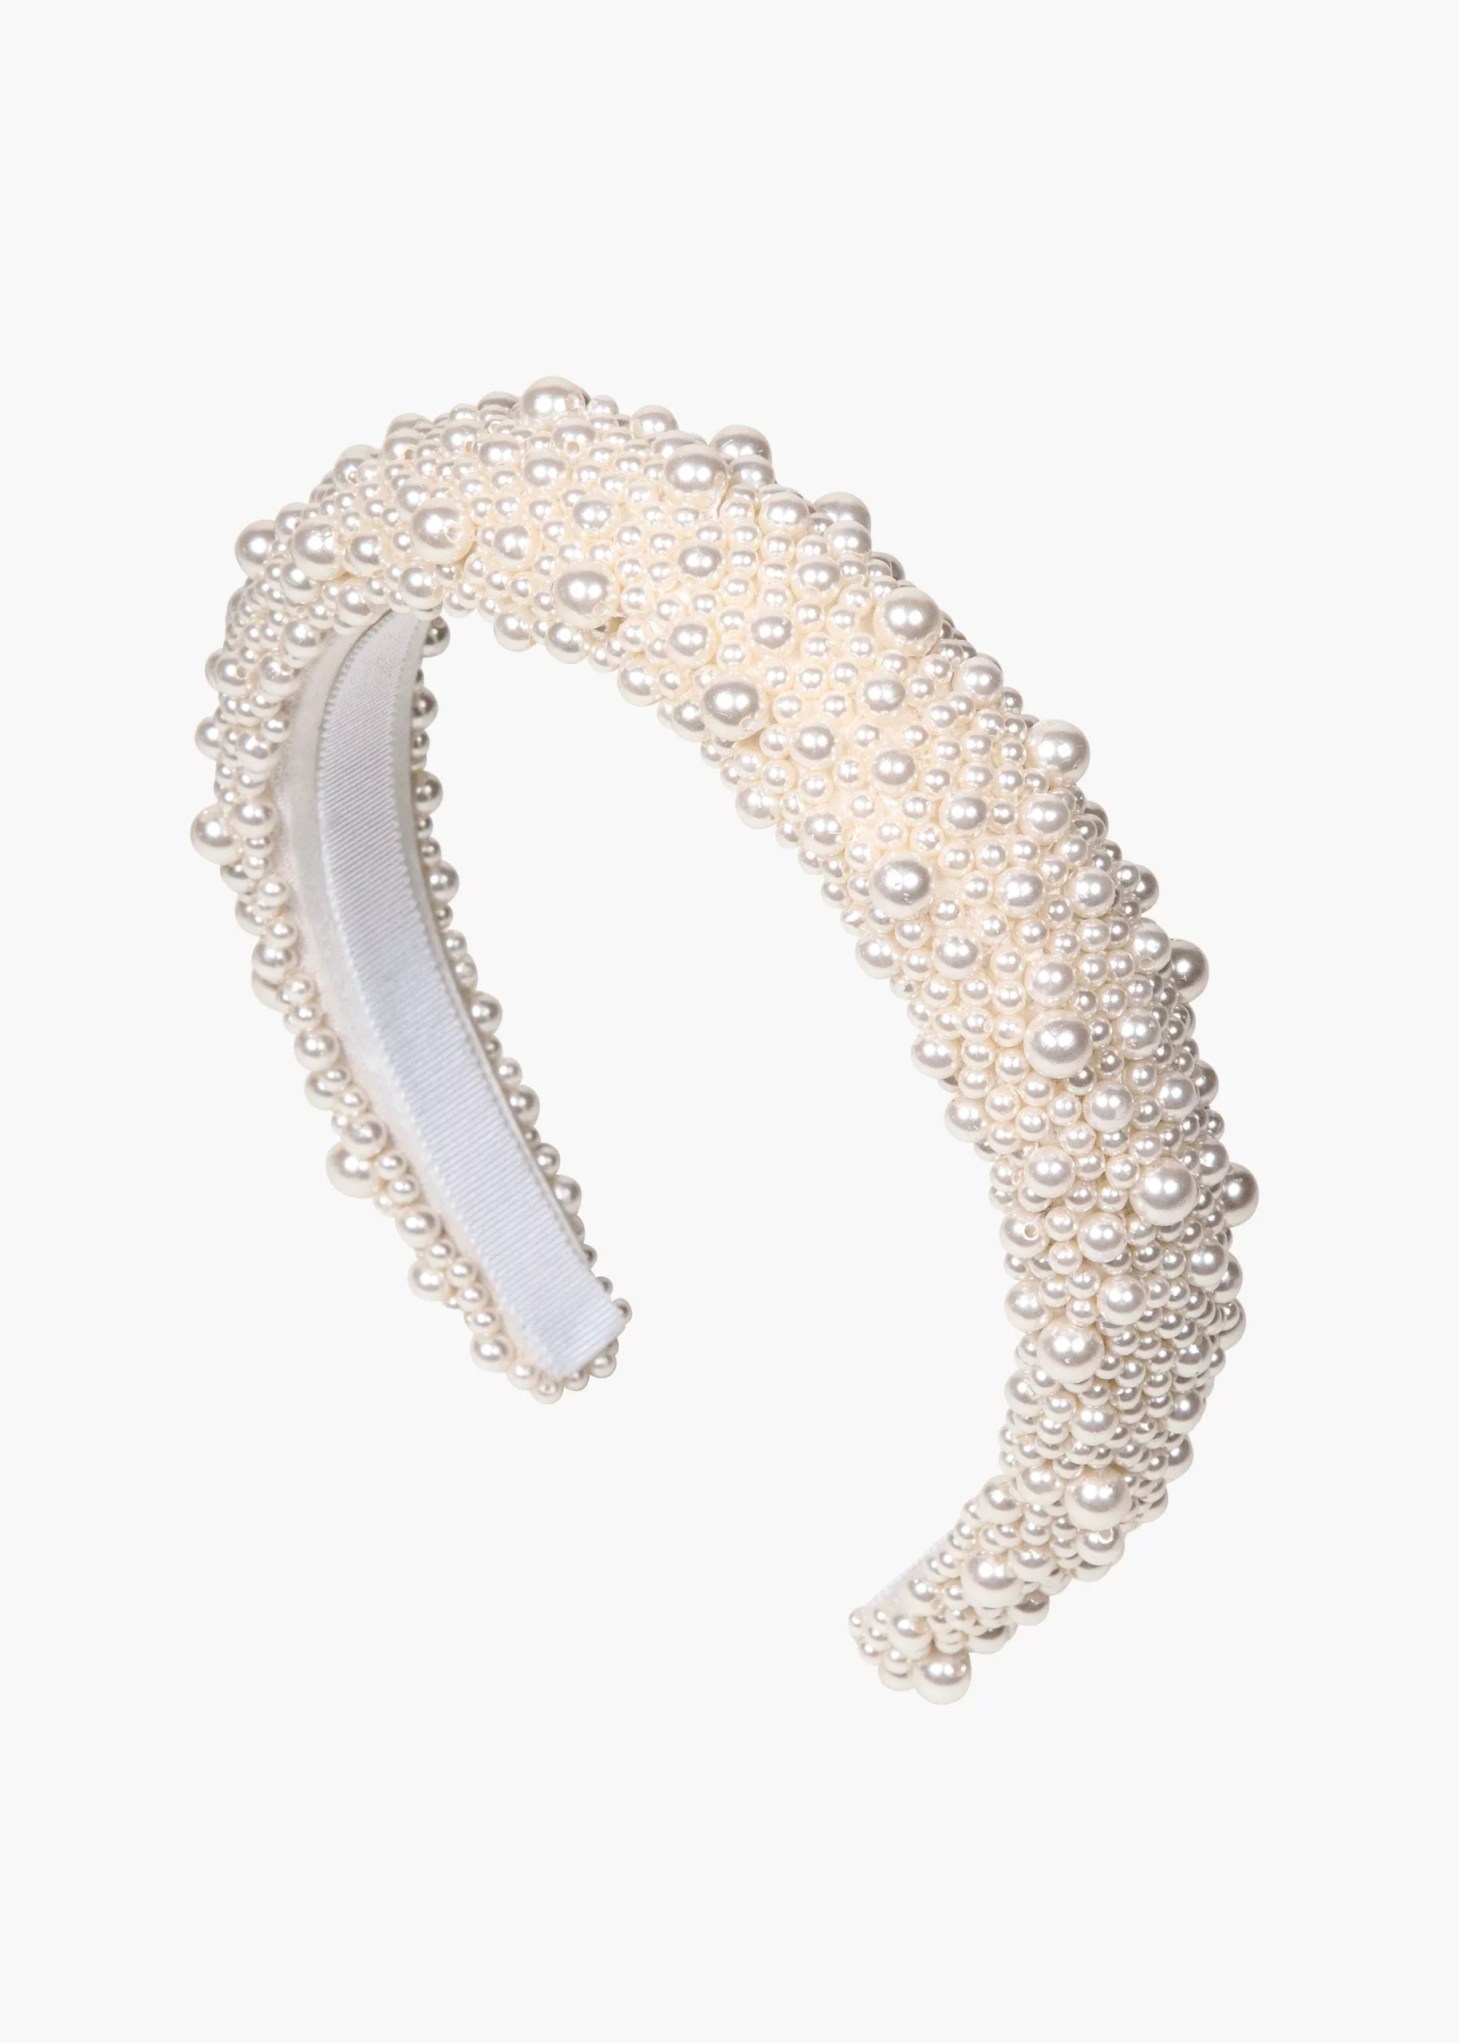 a white jennifer behr bailey pearl headband, a 30th anniversary gift for your wife